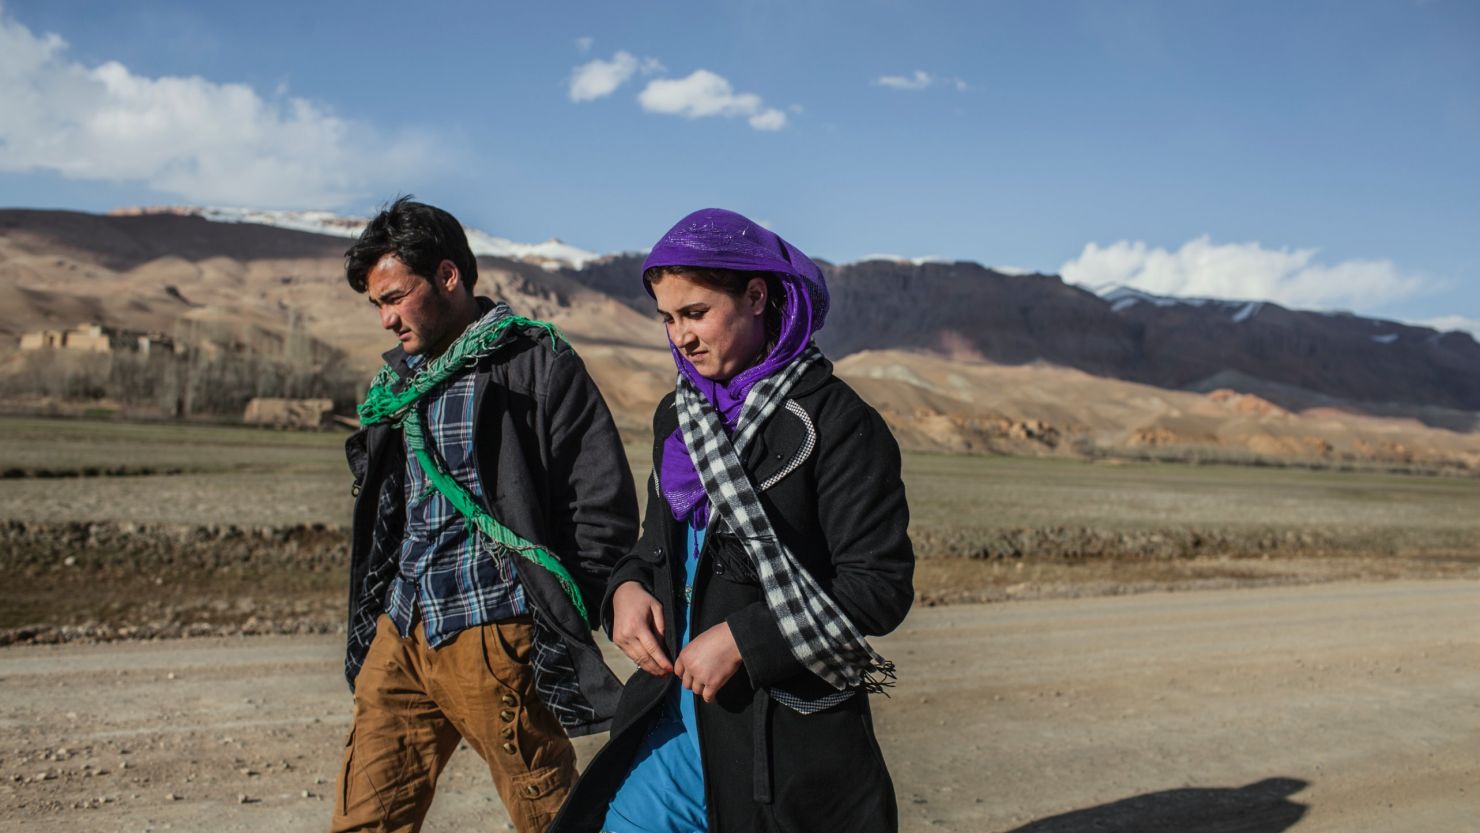 Ali and bride Zakia are shown in Afghanistan's Hindu Kush region in April 2014. Journalist Rod Nordland says their image is iconic for some Afghans.